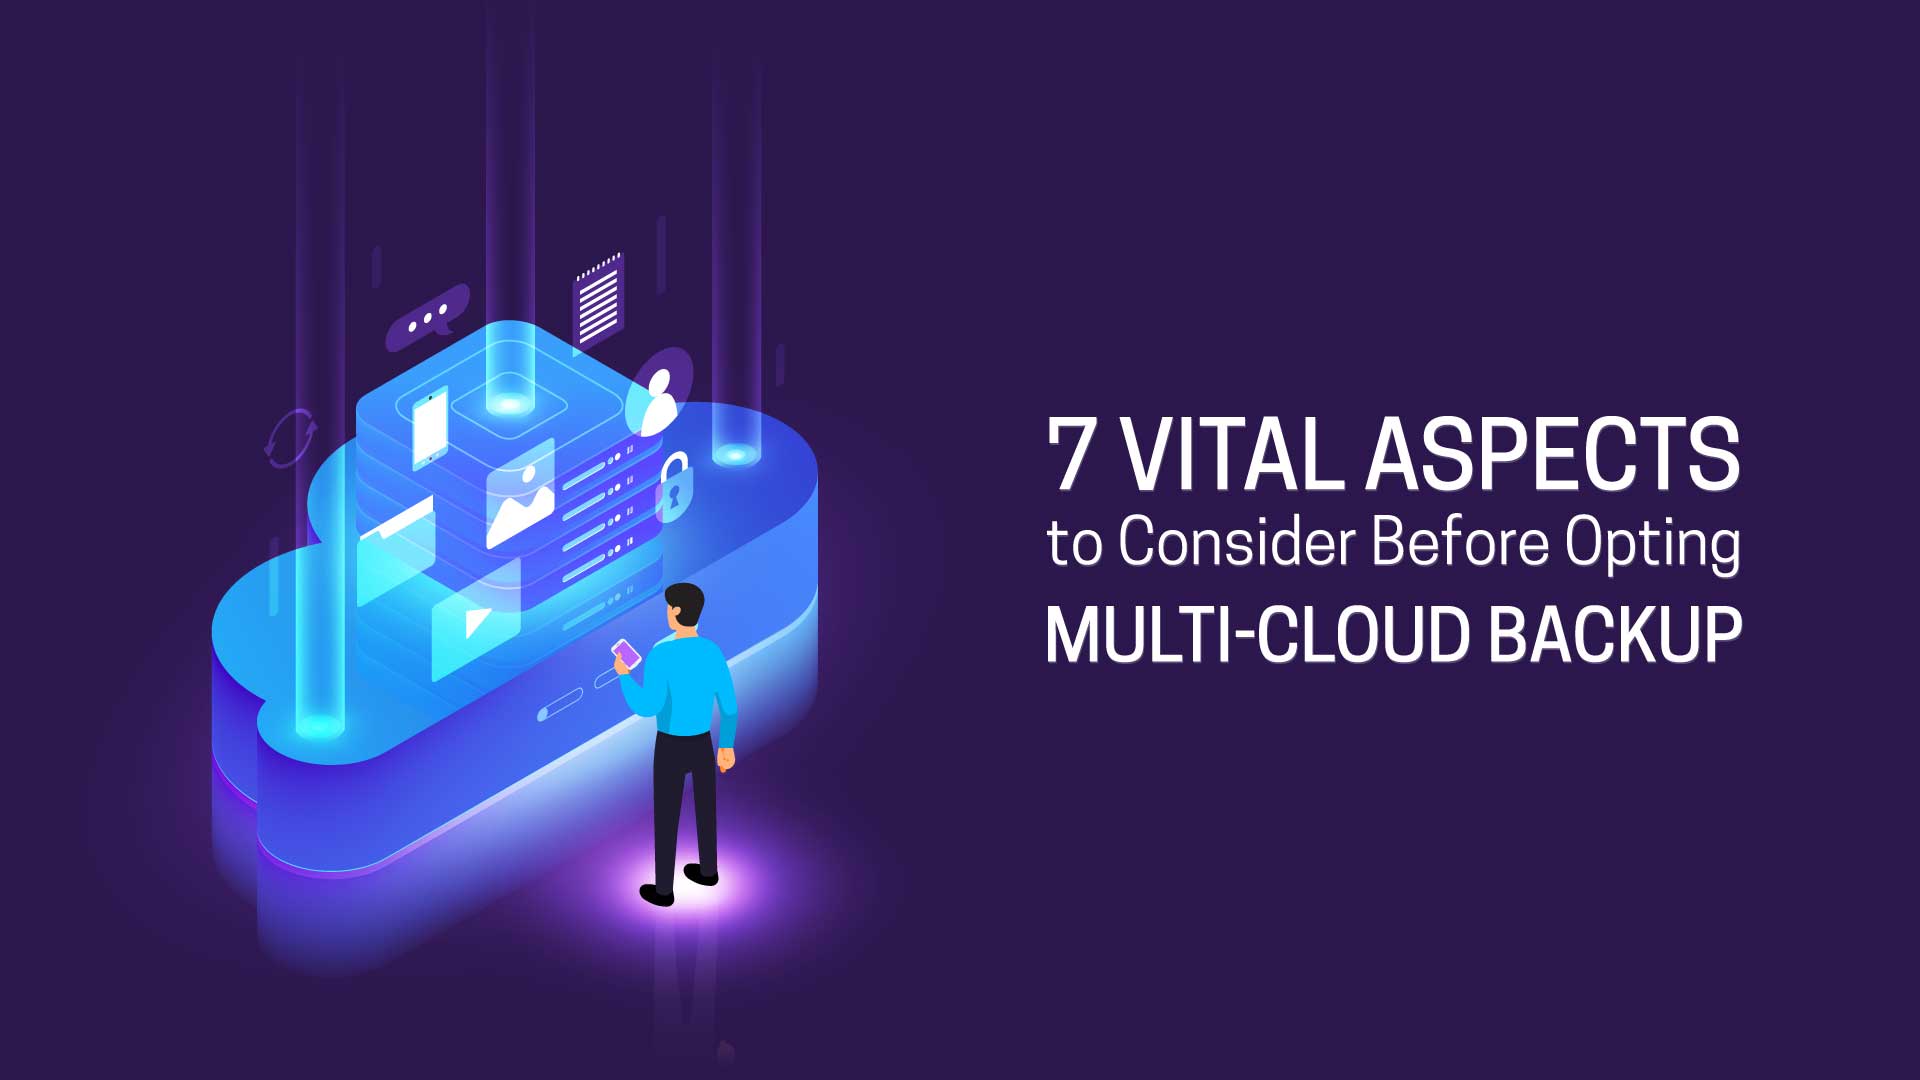 7 Vital Aspects to Consider Before Opting Multicloud Backup